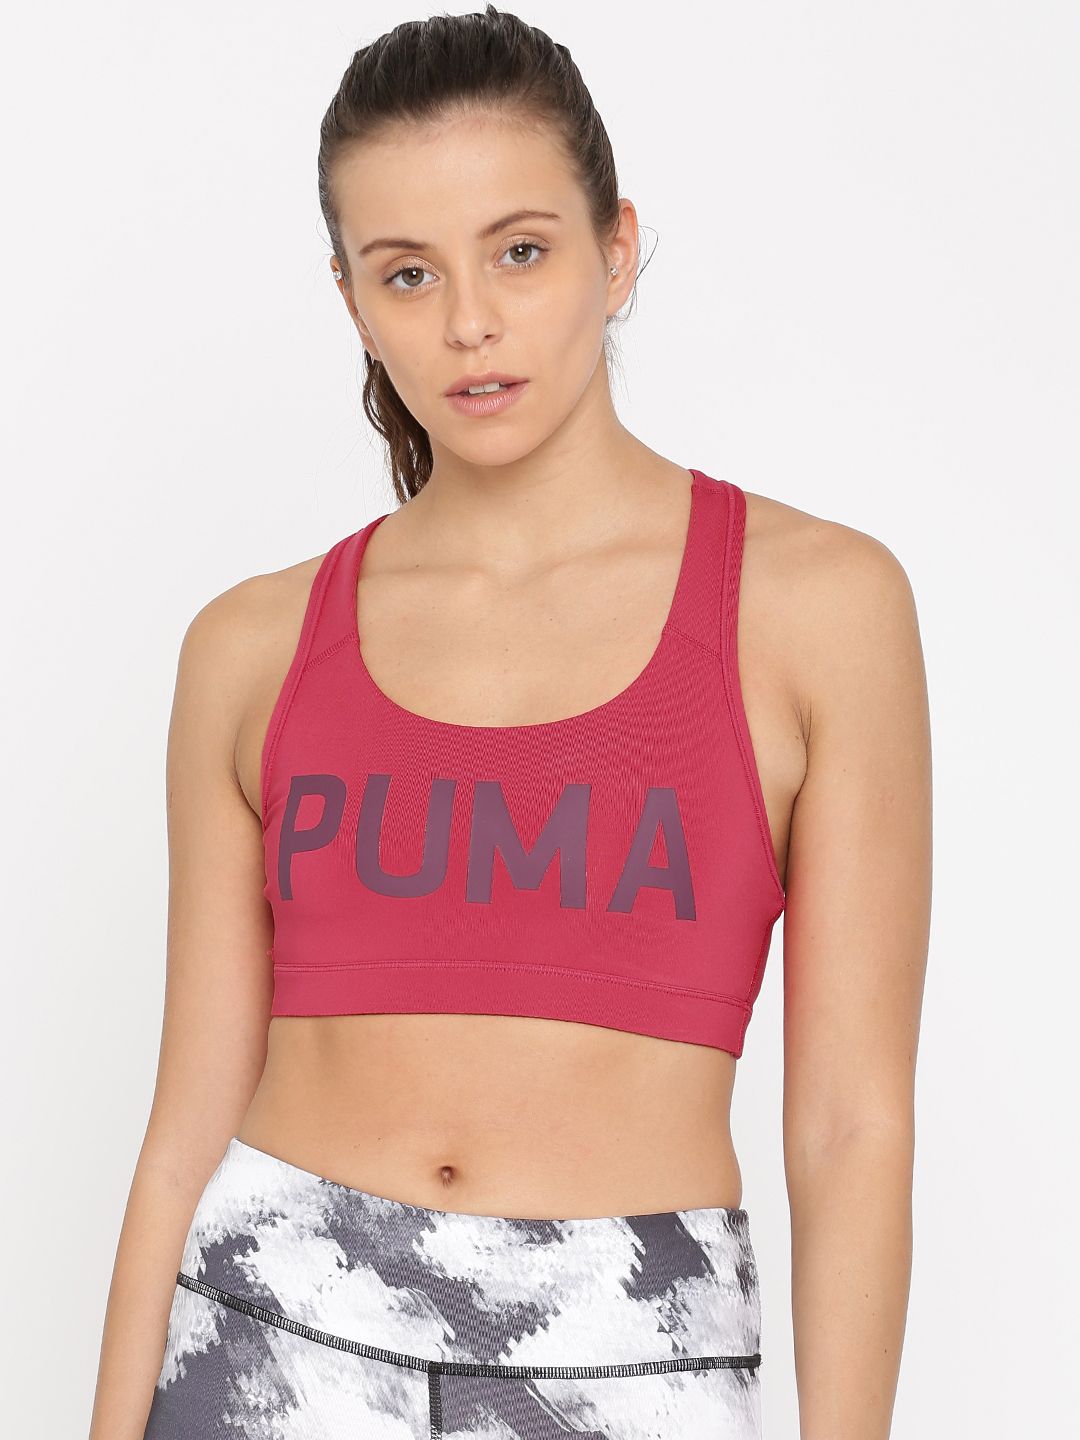 Puma Pink Printed Non-Wired Non-Padded PWRSHAPE Forever Sports Bra 51599109 Price in India